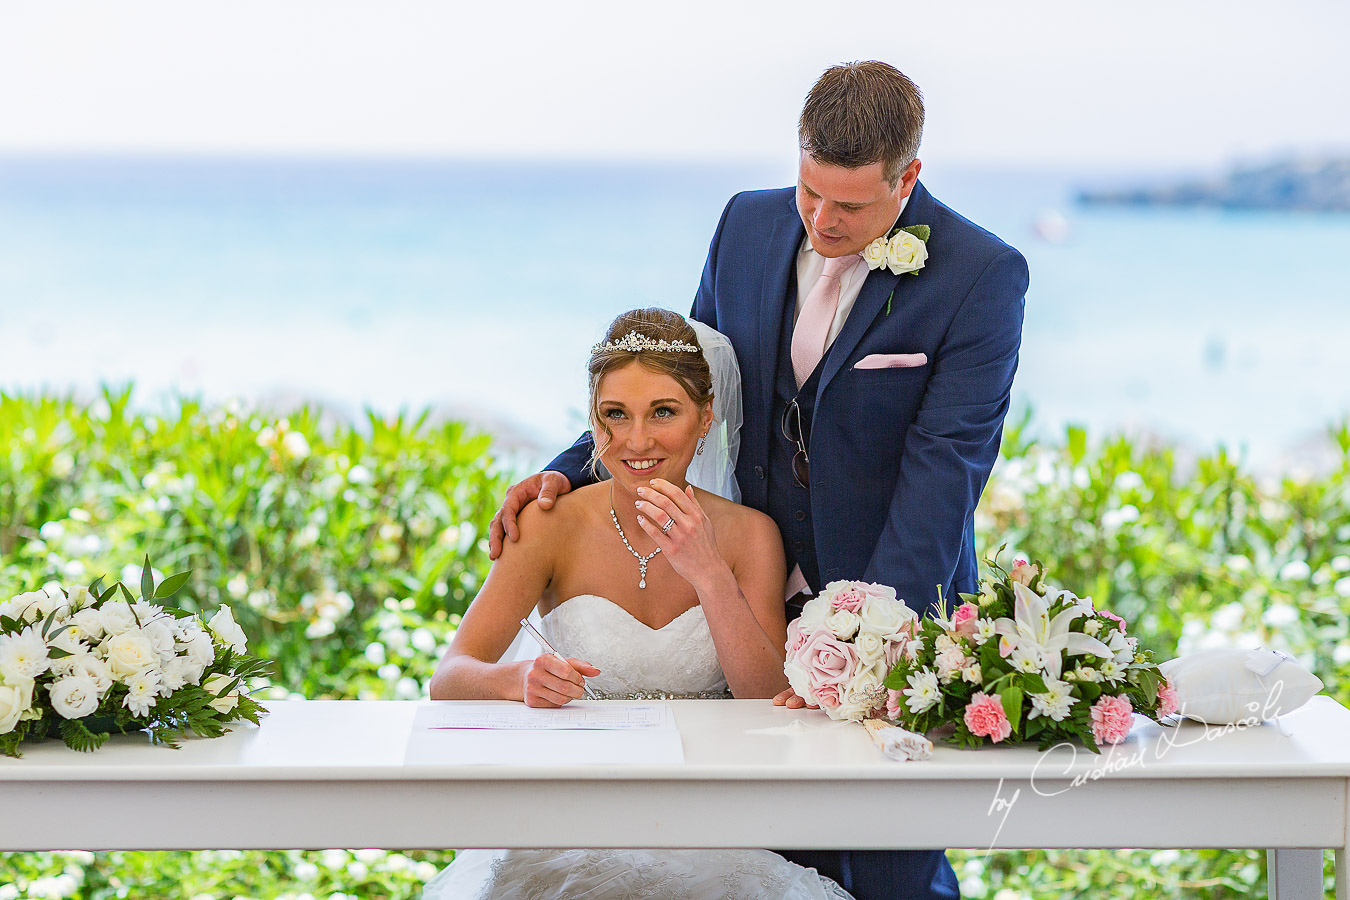 Bride Alicia signing her wedding certificate, moment photographed at Nissi Beach Resort in Ayia Napa, Cyprus by Cristian Dascalu.